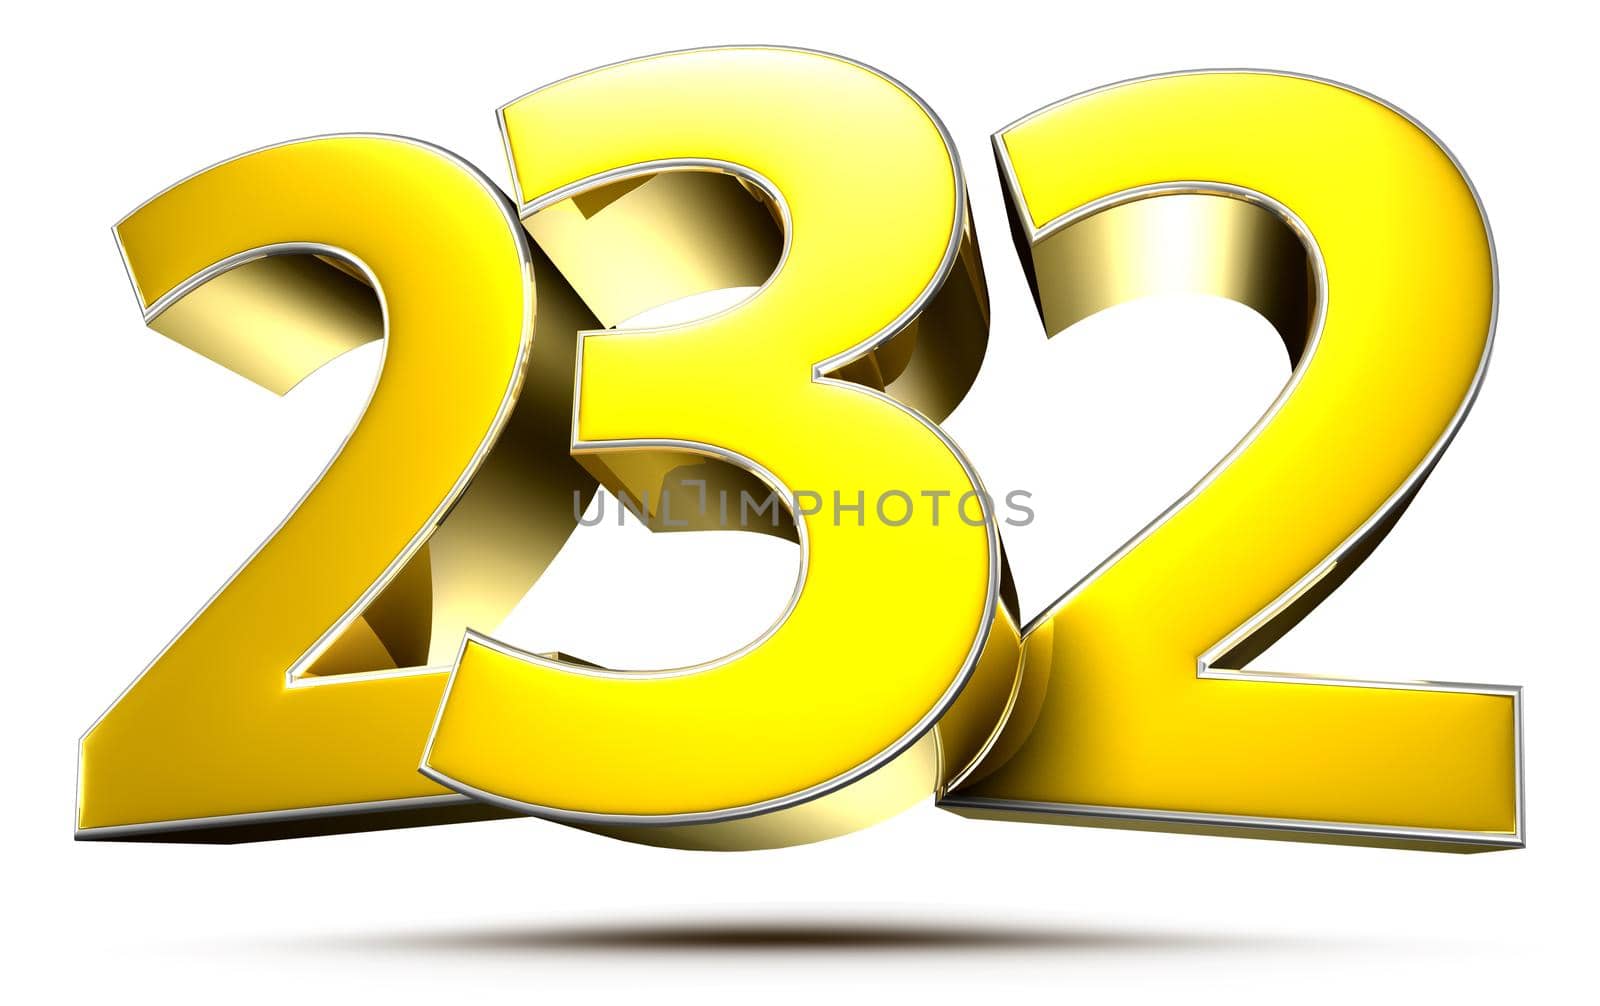 232 gold 3D illustration on white background with clipping path.